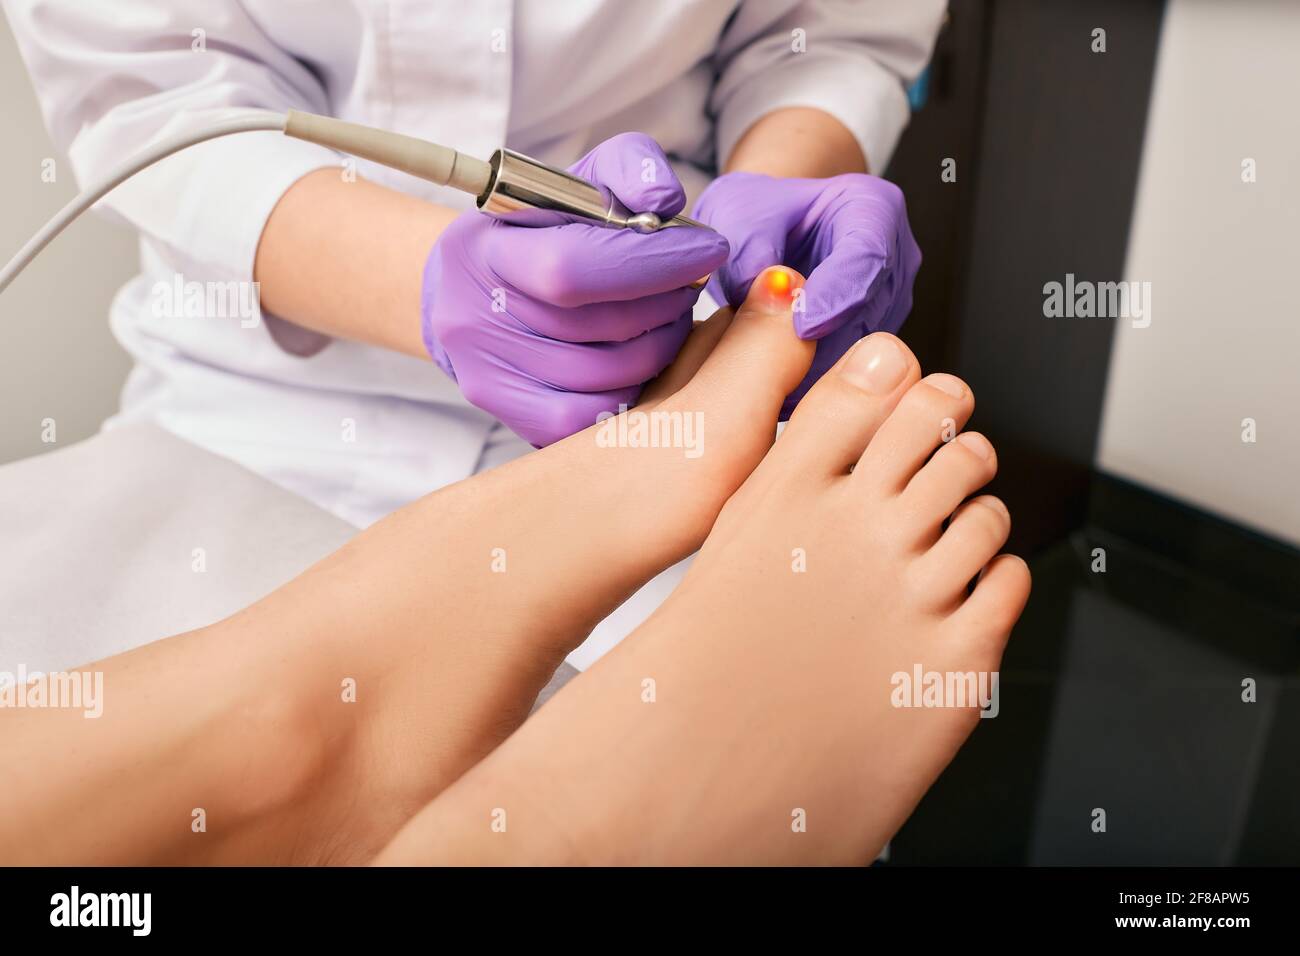 Treatment fungal infection on woman's toenail with podologist using a medical laser. Fungal infection on the human toenails Stock Photo